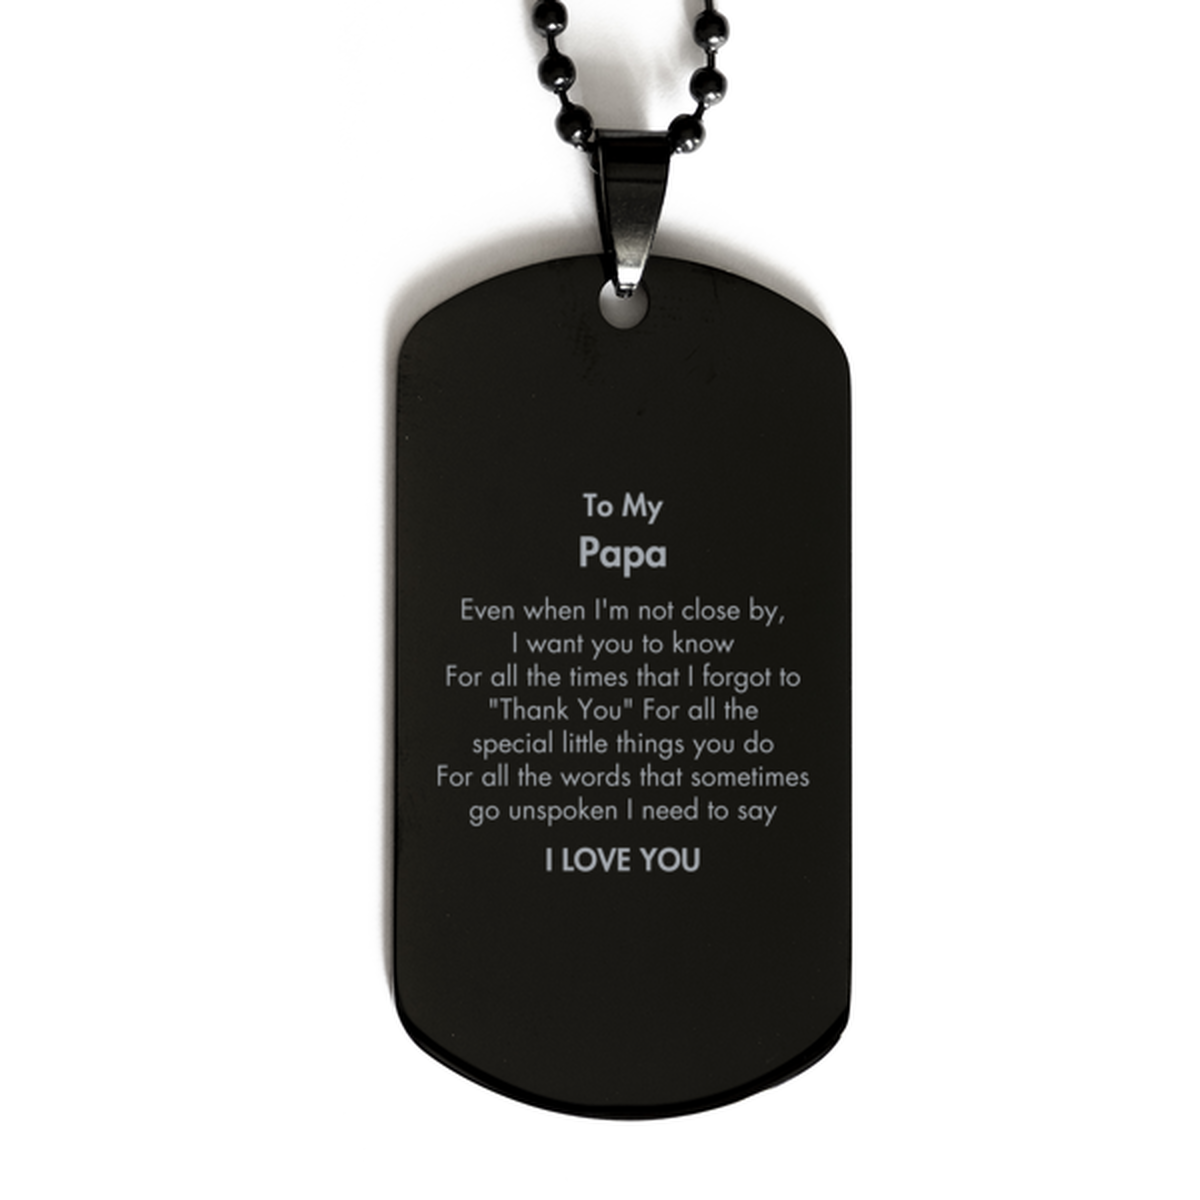 Thank You Gifts for Papa, Keepsake Black Dog Tag Gifts for Papa Birthday Mother's day Father's Day Papa For all the words That sometimes go unspoken I need to say I LOVE YOU